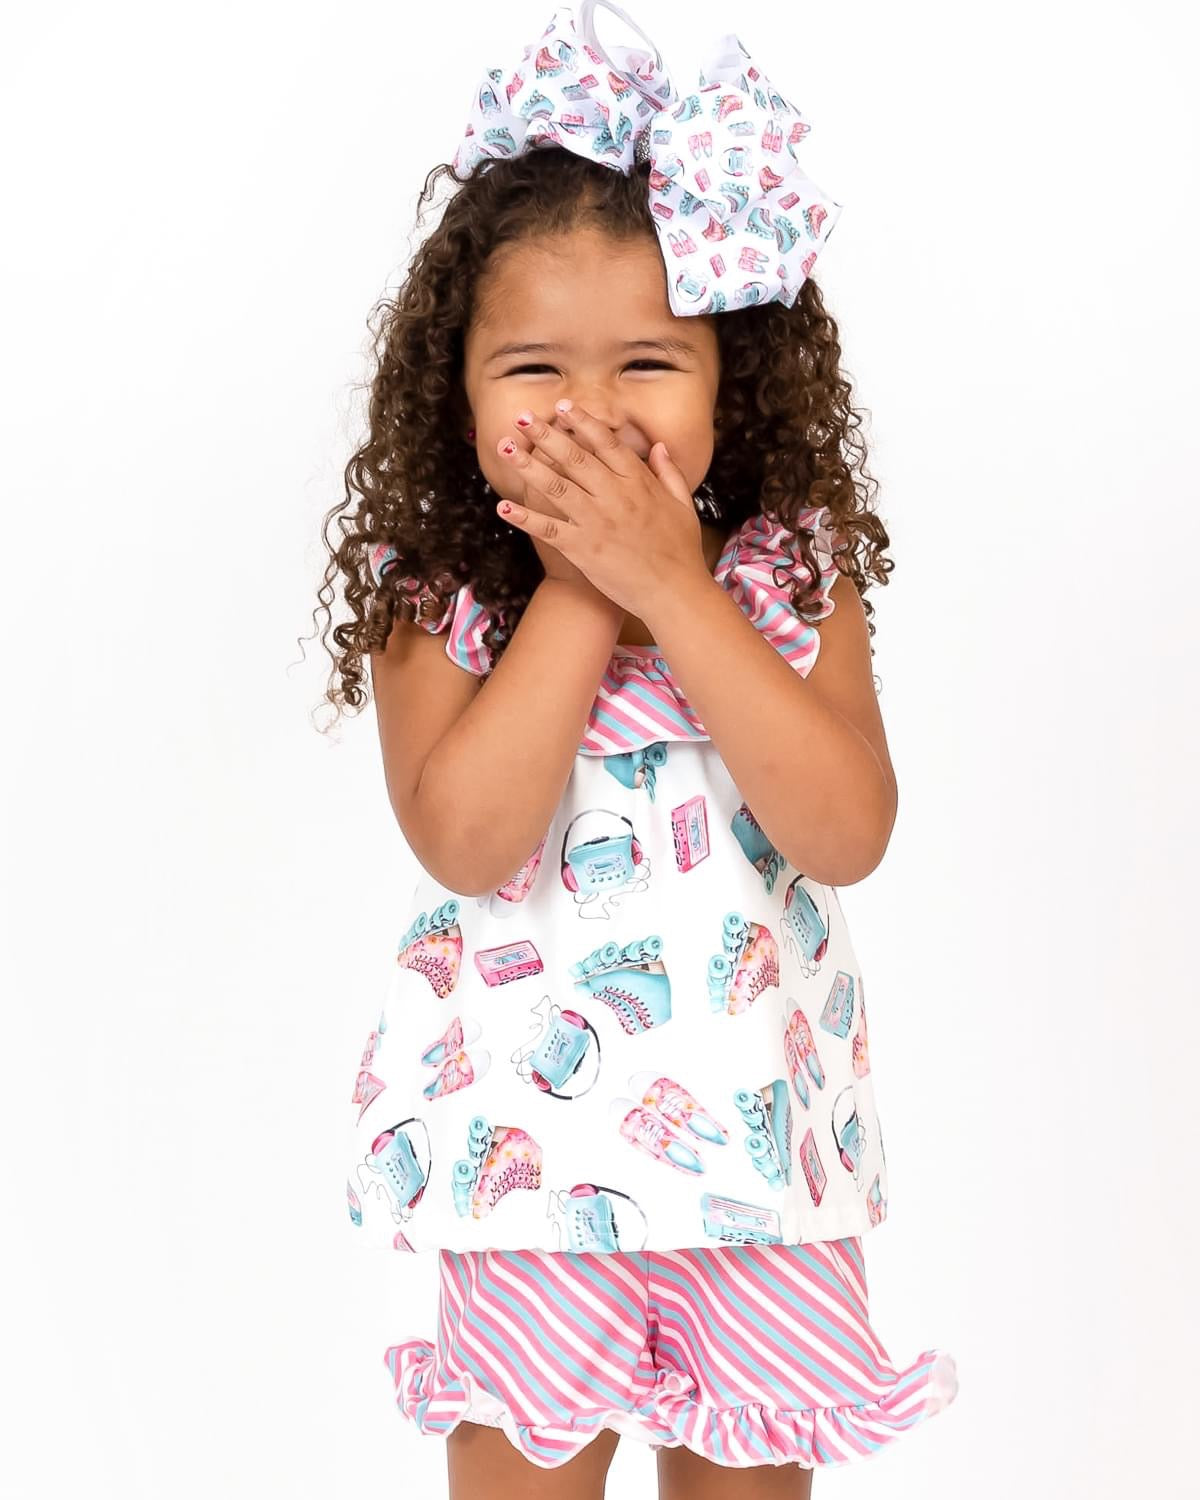 Skater Girl Shorts Set by Pete and Lucy